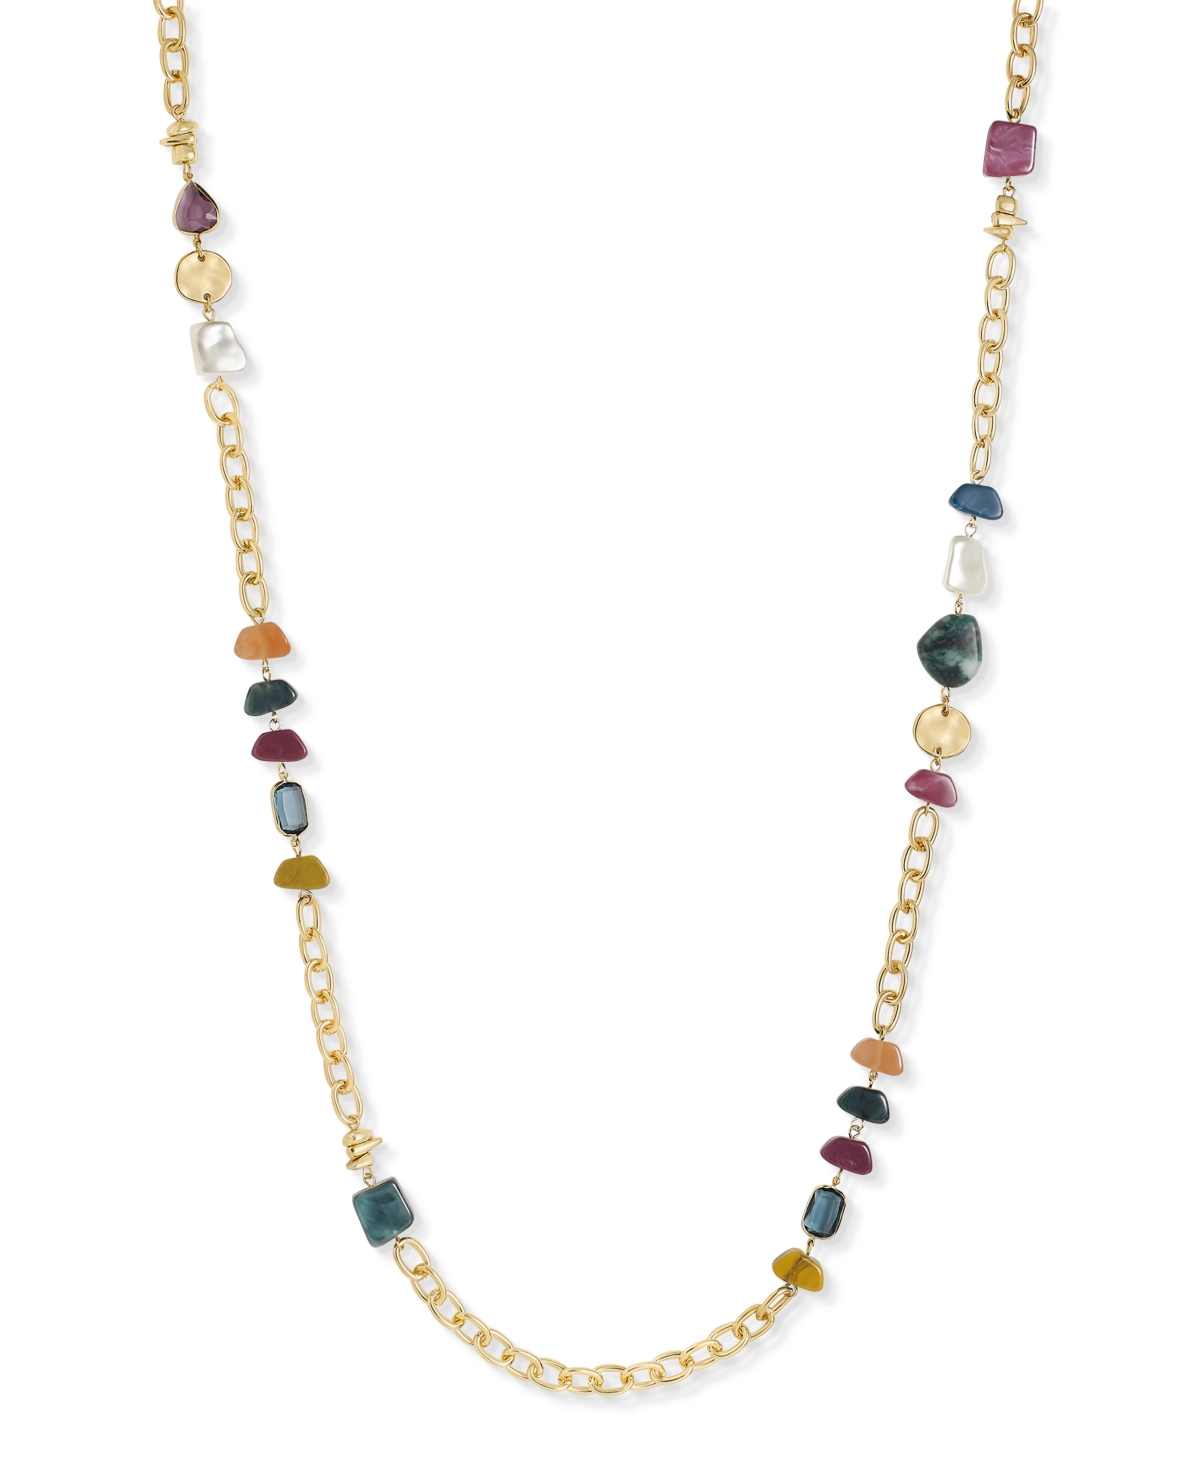 Gold-Tone Mixed Bead Station Strand Necklace, 42" + 3" extender, Created for Macy's - Multi